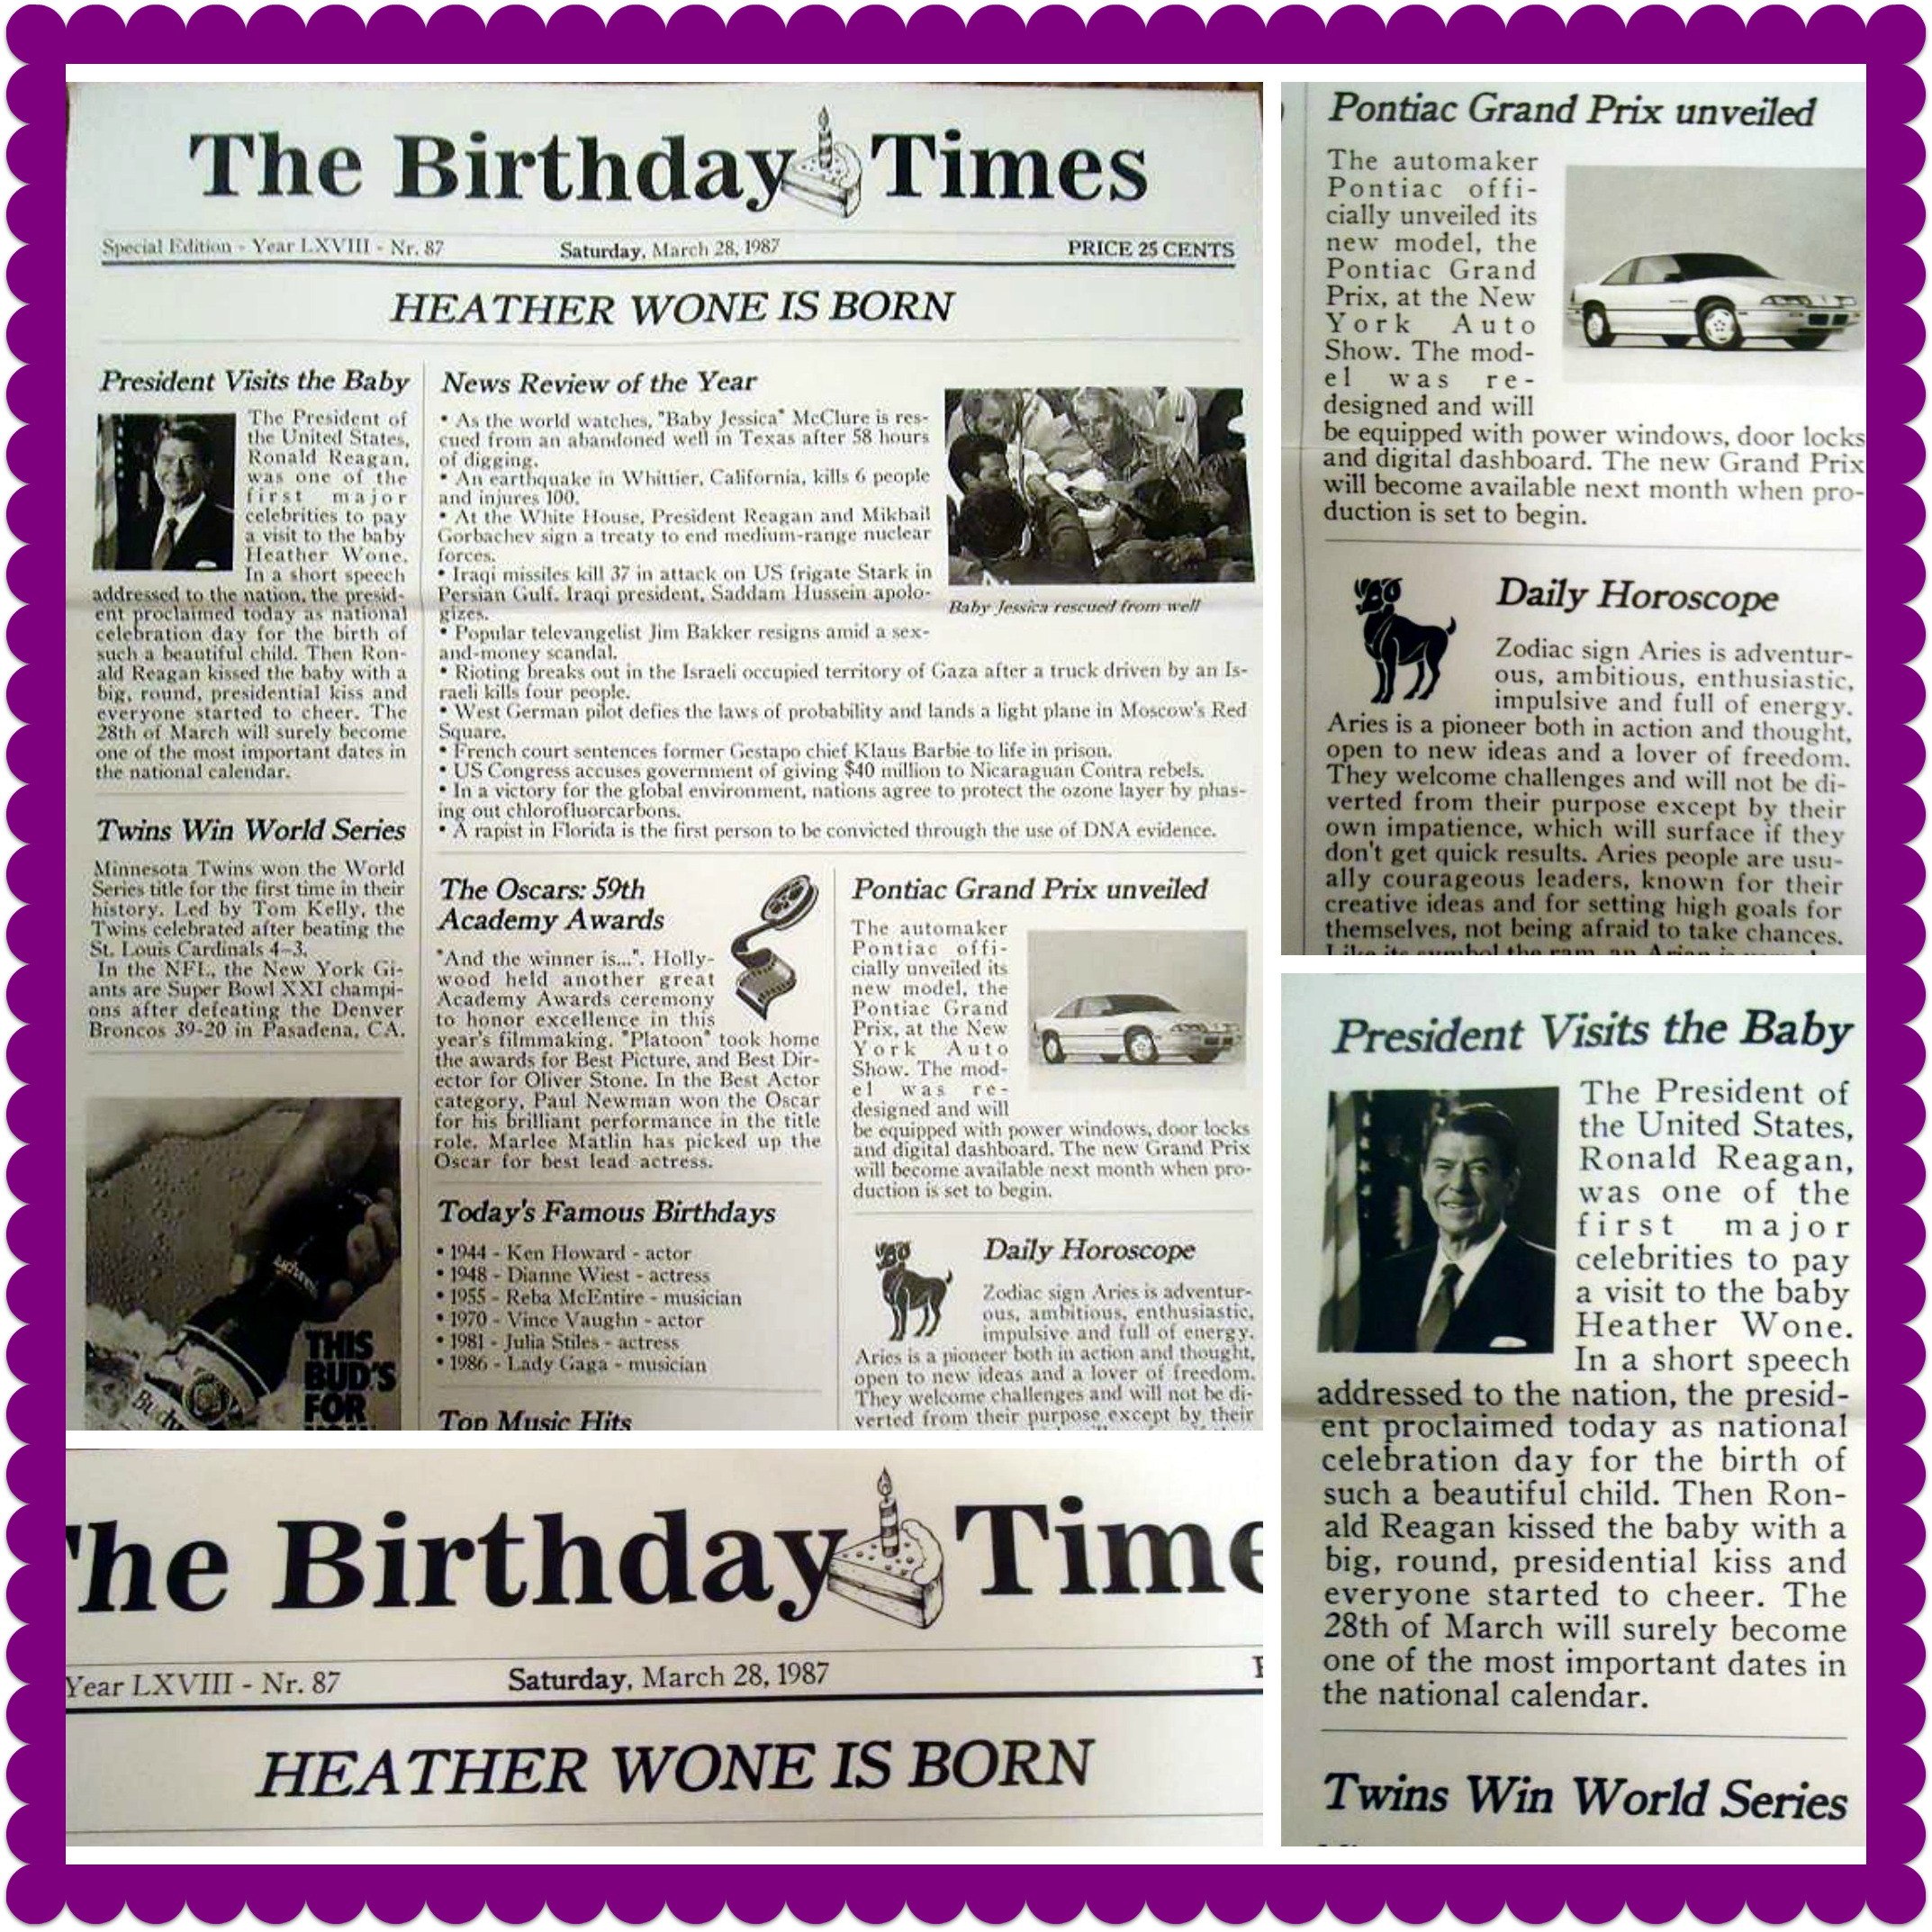 https://missfrugalmommy.com/wp-content/uploads/2013/07/birthday-times-2.png